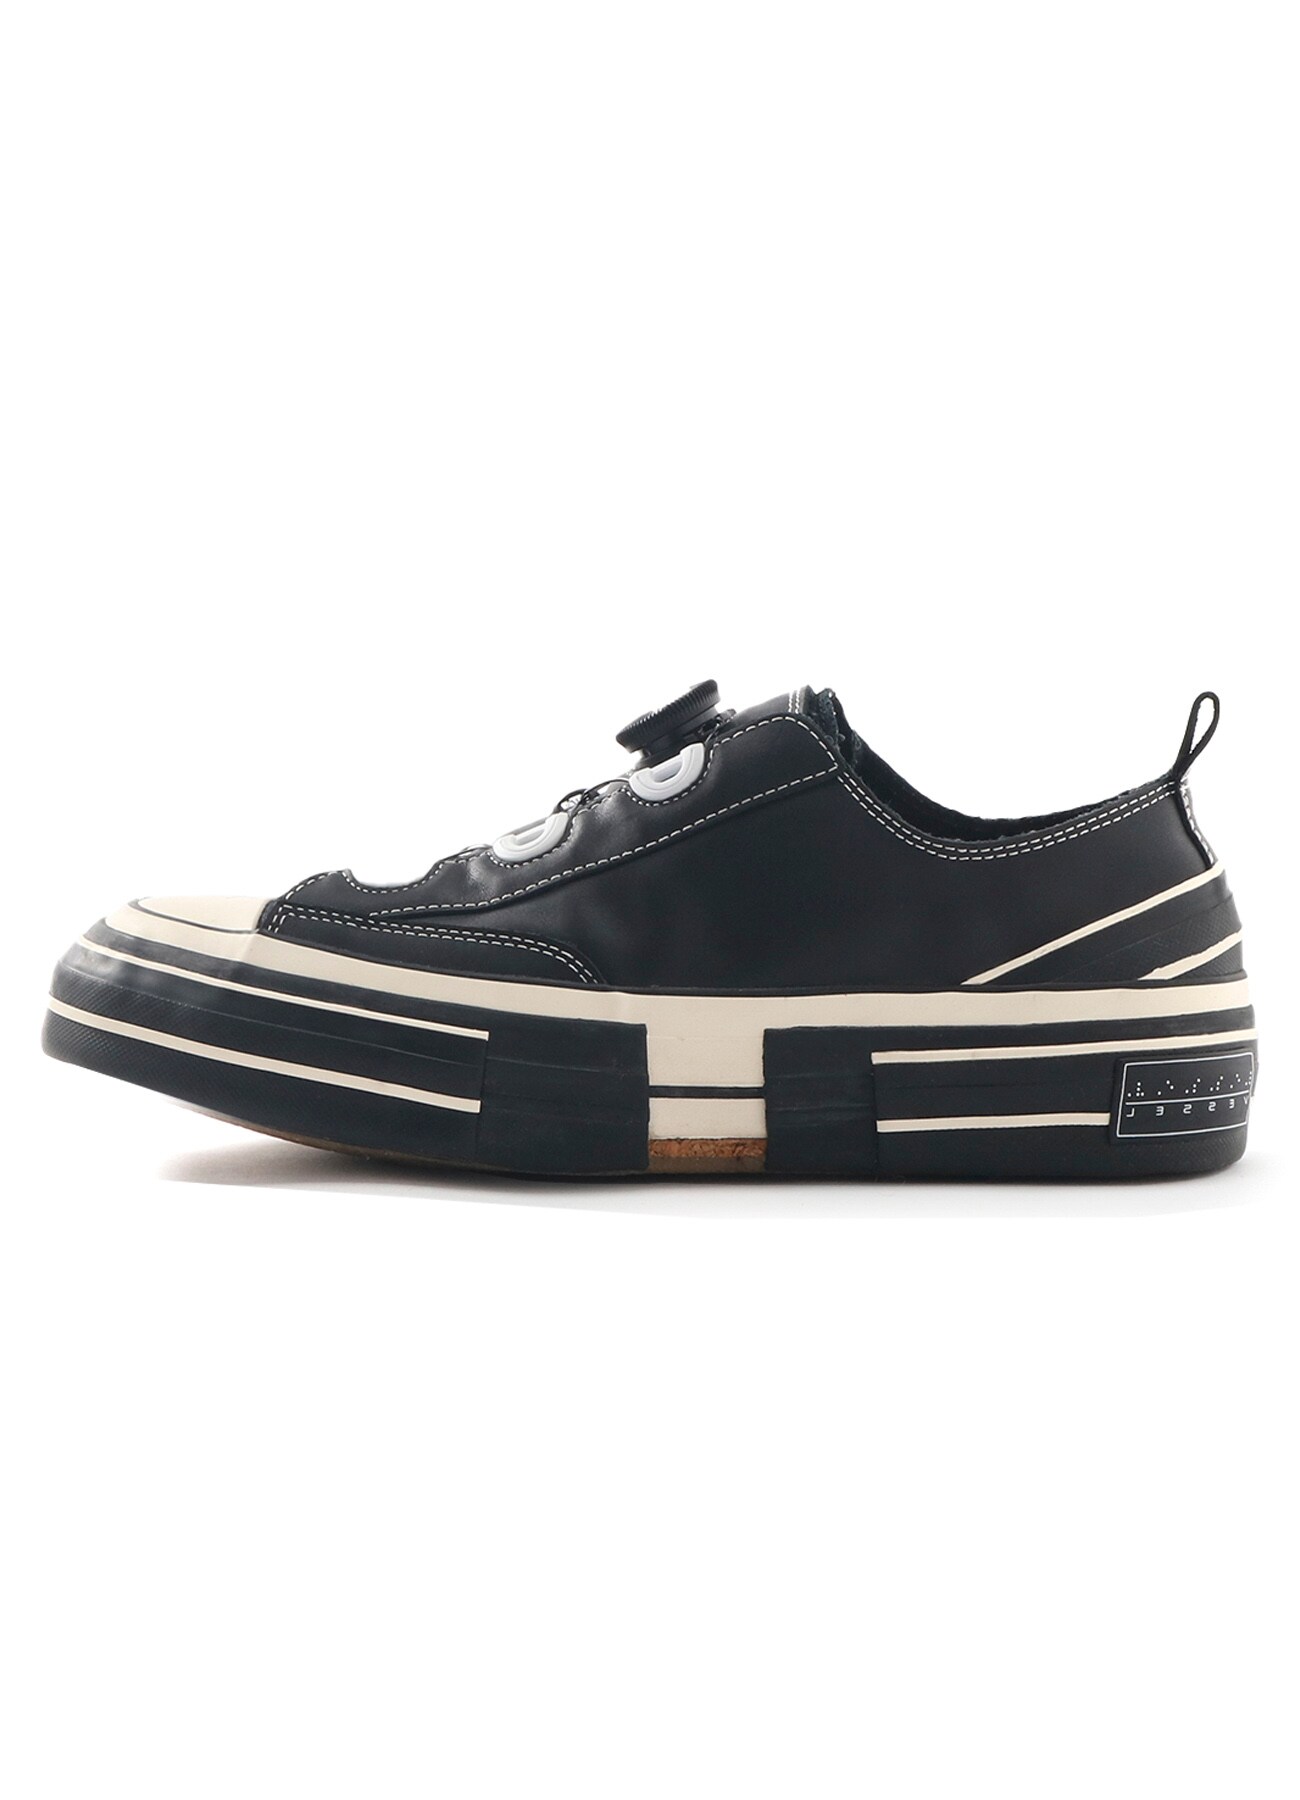 Y's x VESSEL SNEAKER COLOR SMOOTH LEATHER